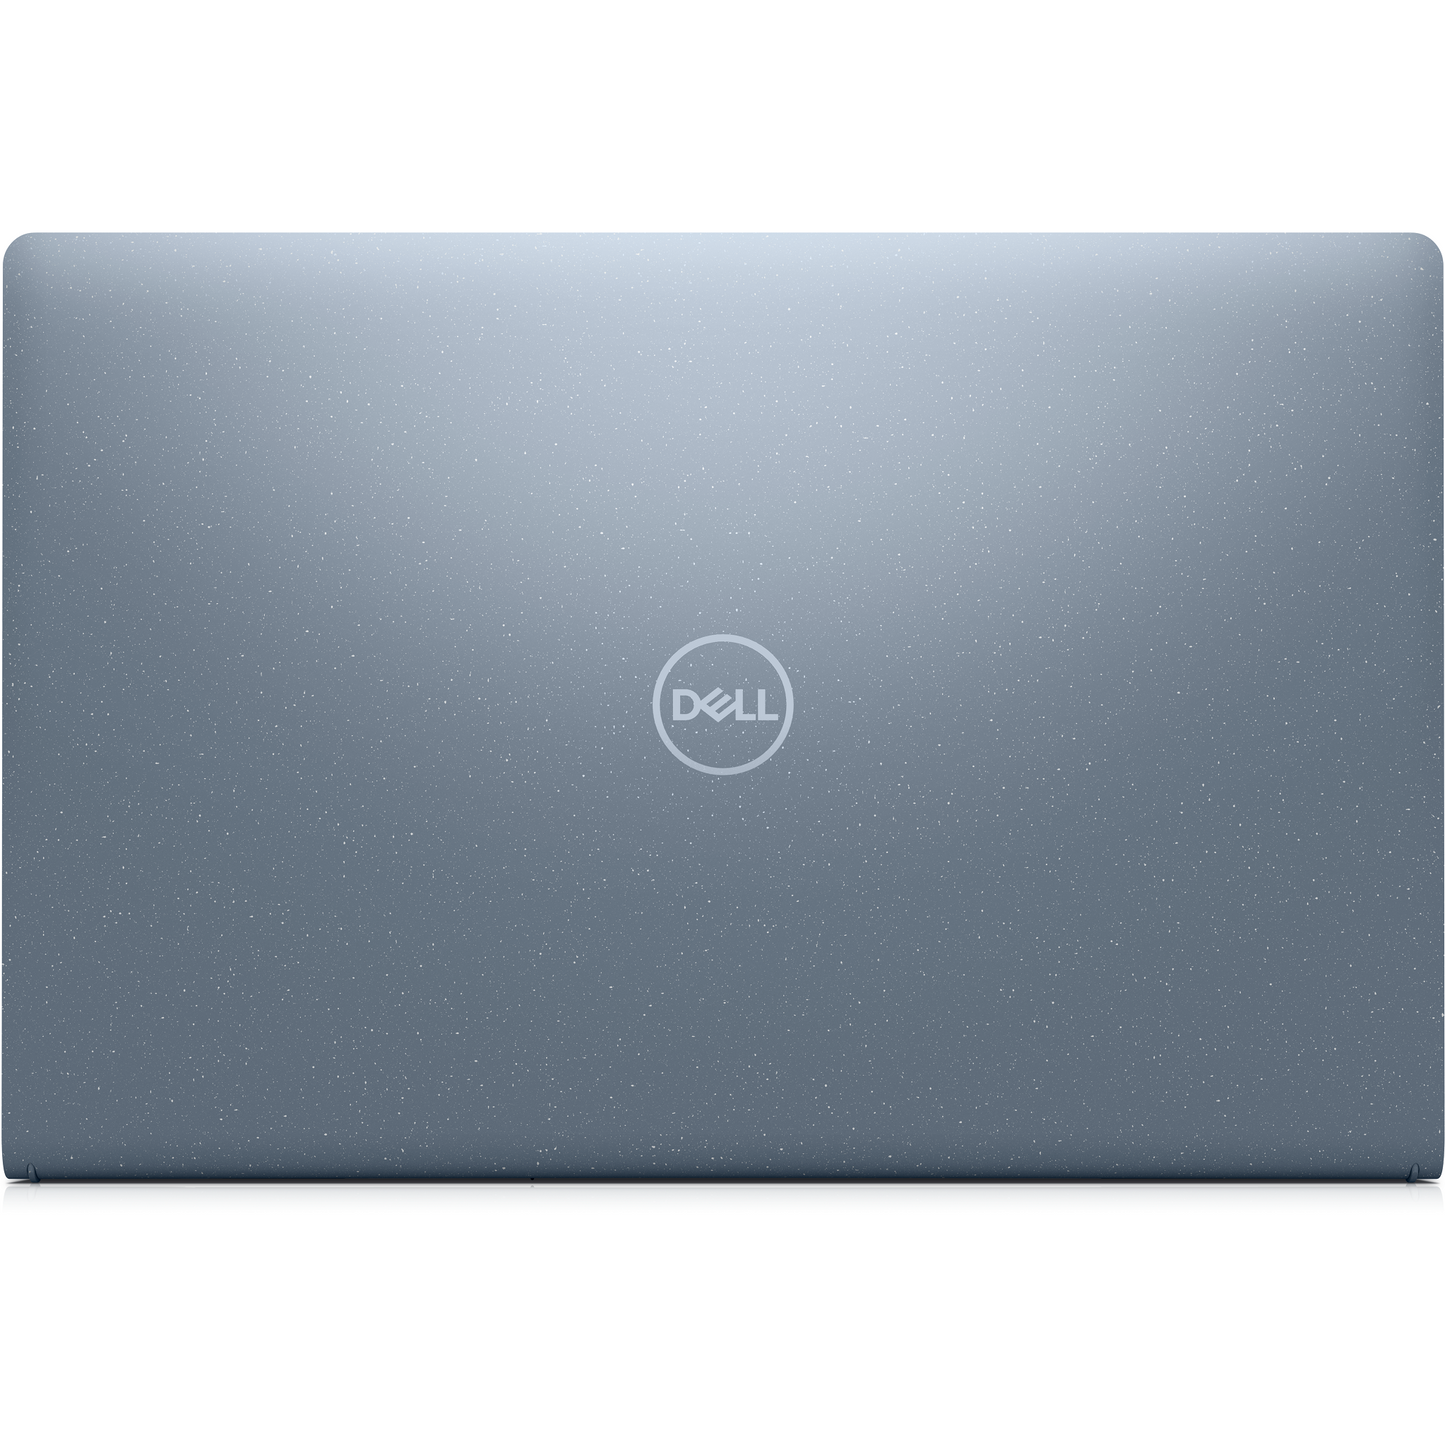 Dell 15 Inspiron 3511 (2021) 15.6 inches FHD Intel i5- 11th Gen 1135G7 Laptop (Windows 10 + MS Office 8GB - 512GB SSD Integrated Graphics Backlit KB, D560509WIN9S-Platinum Silver, 1.8Kg)